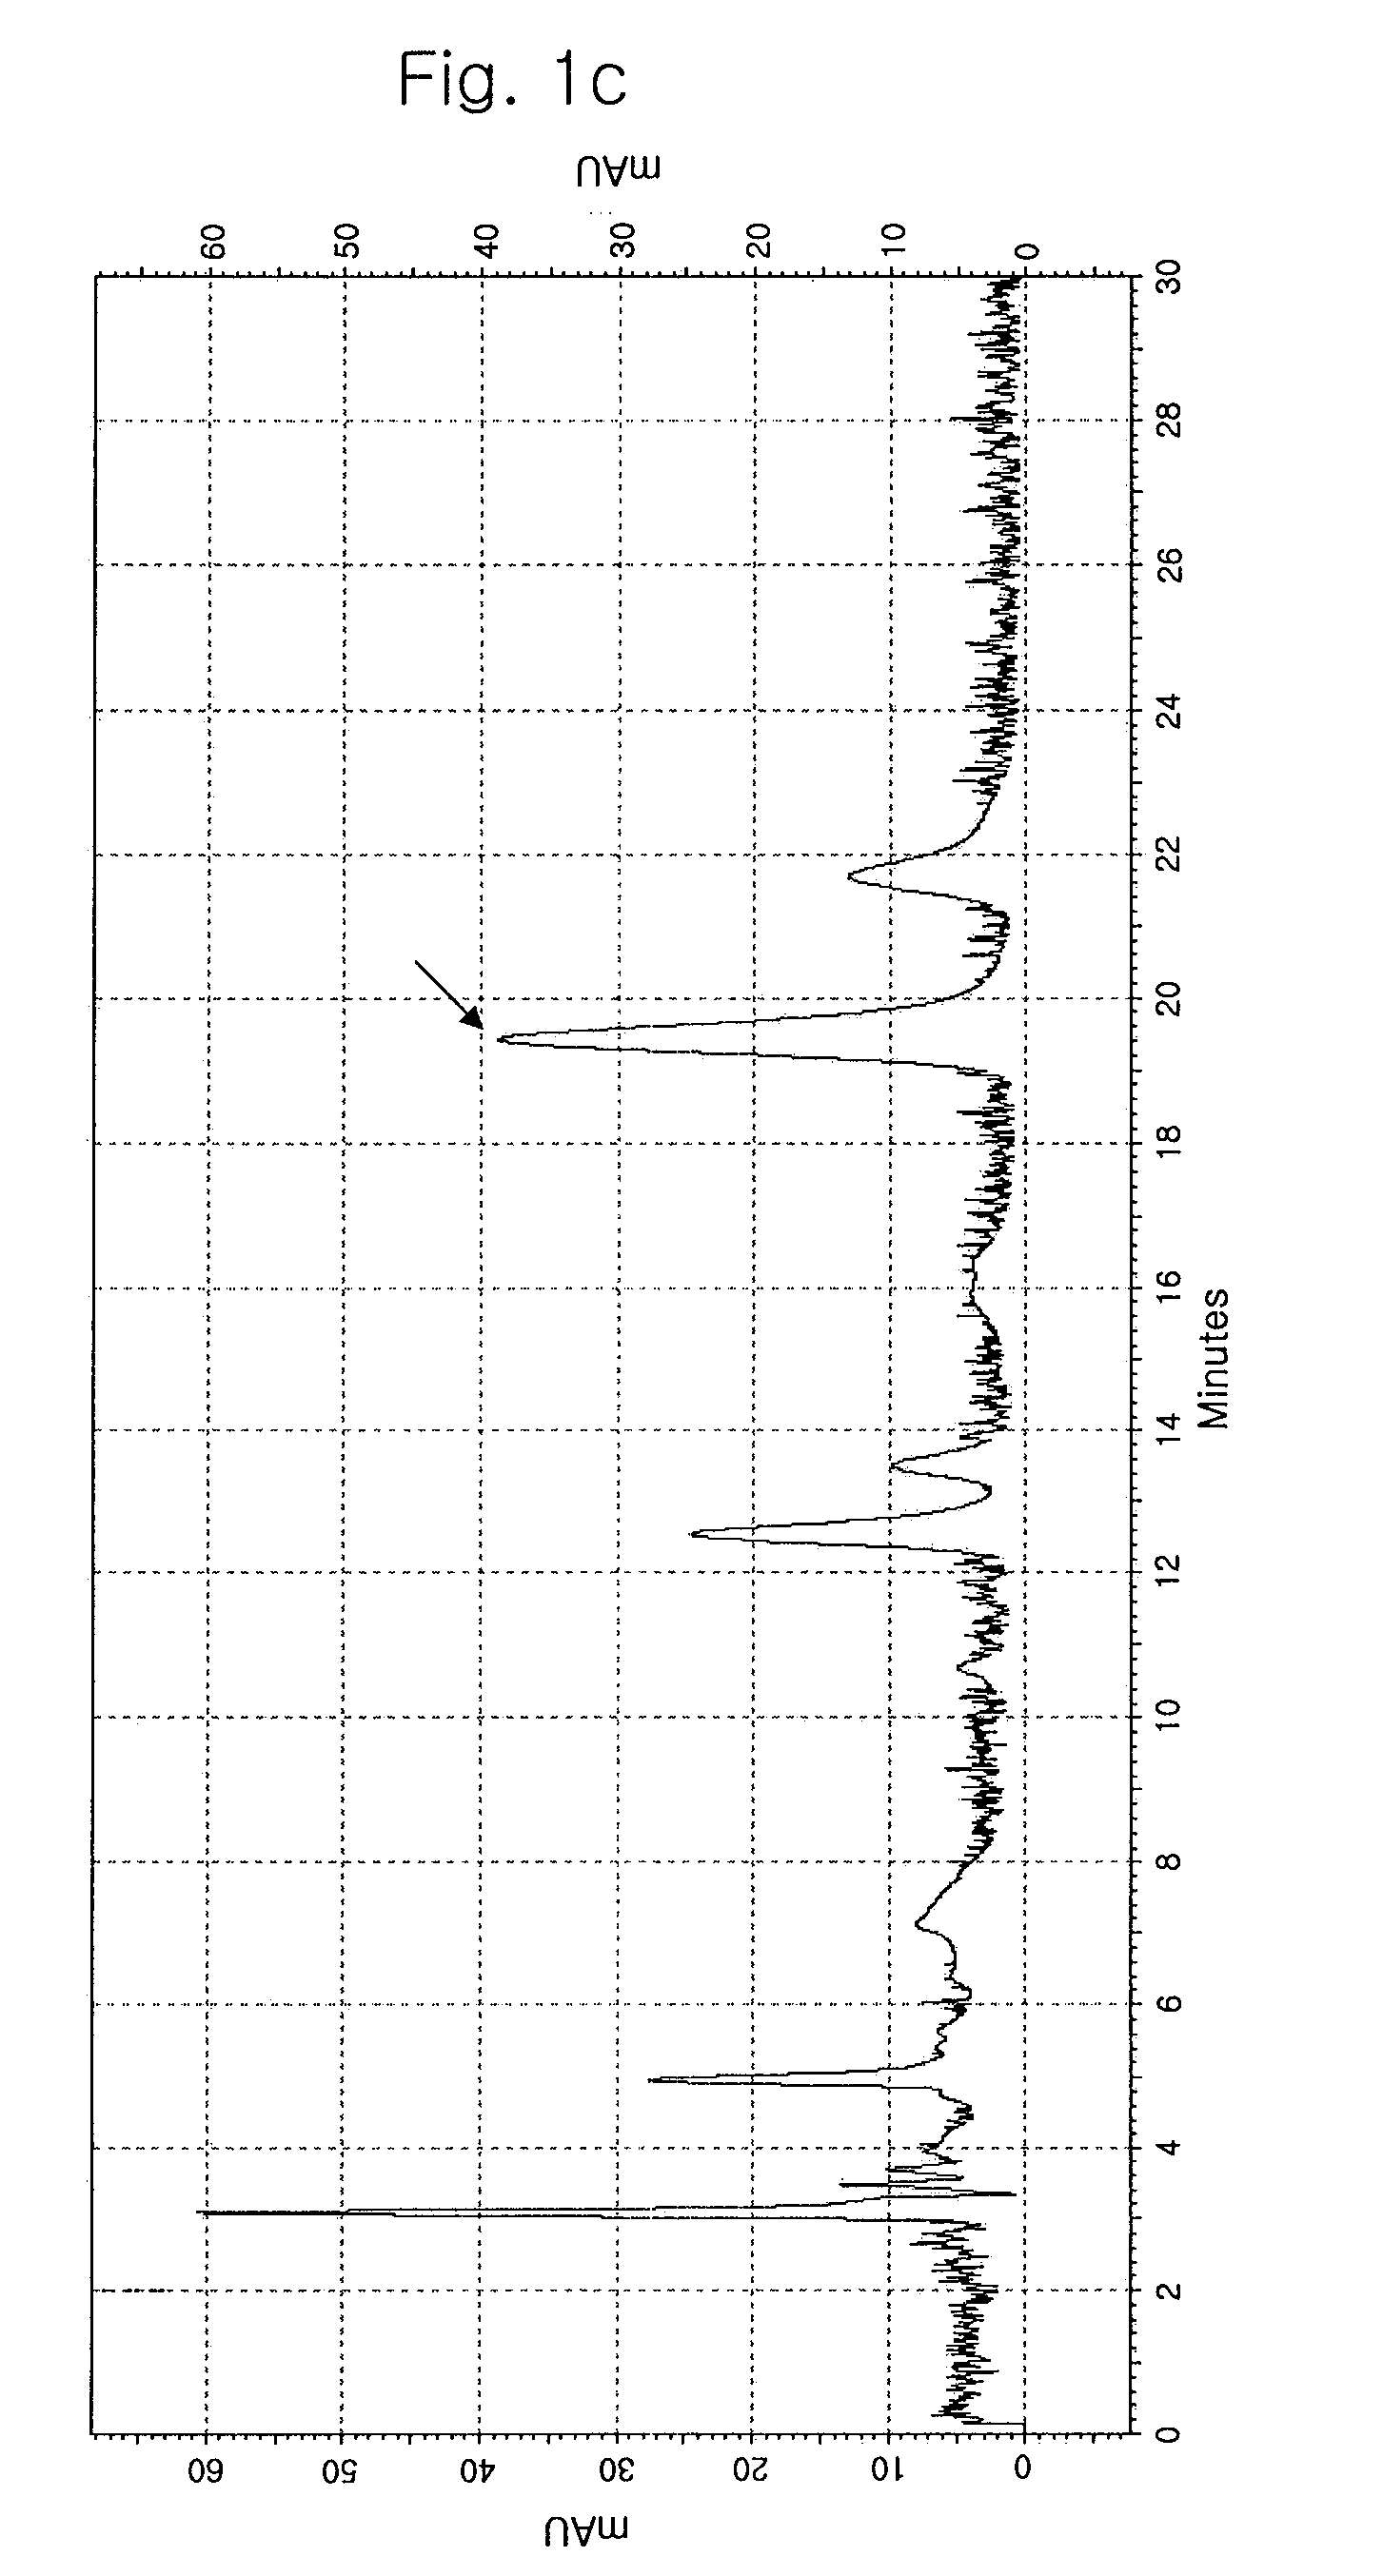 Methods for Preparing Chlorophyll a and Chlorin e6